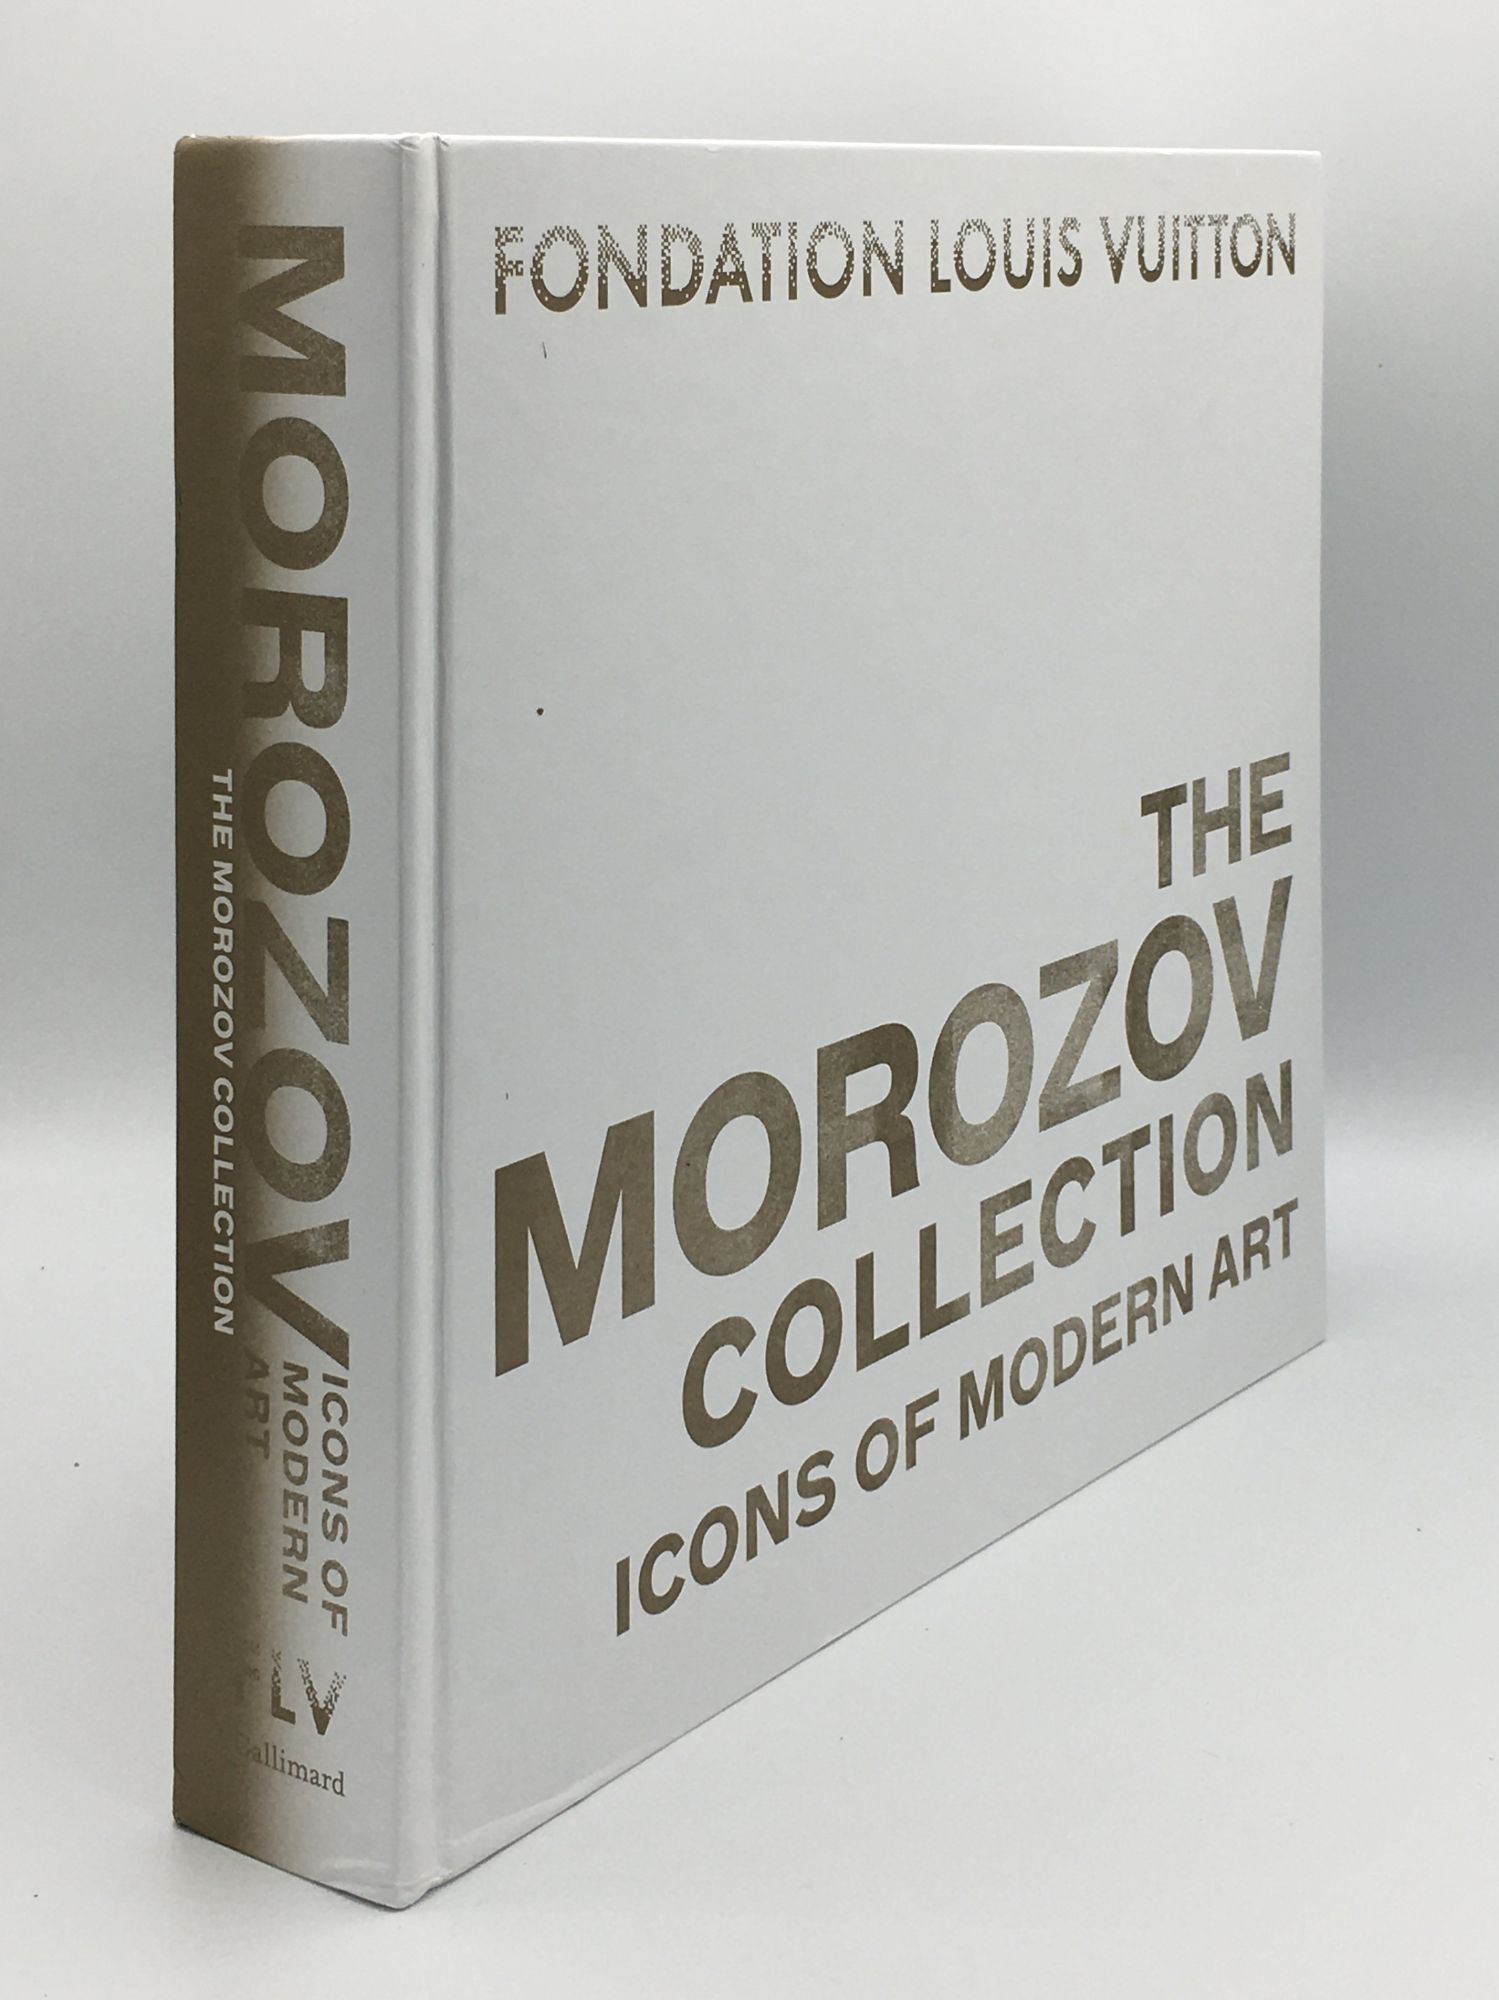 The Morozov Collection Hosted by Fondation Louis Vuitton